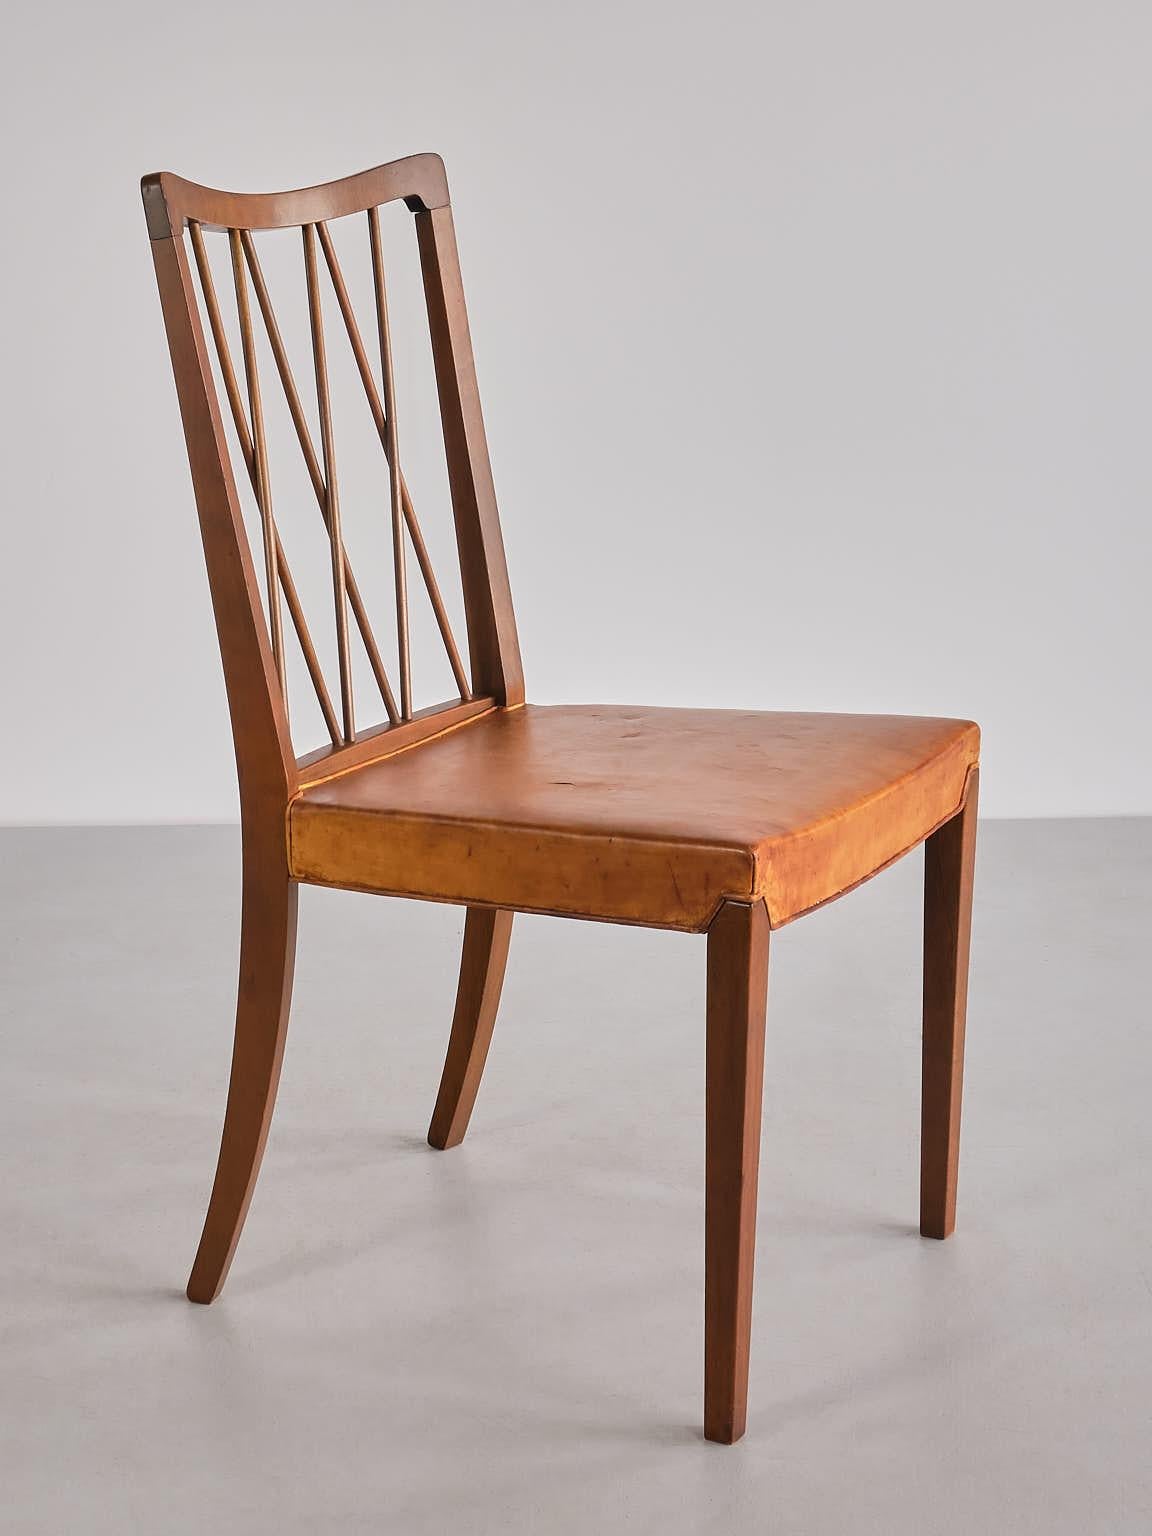 Set of Eight Frode Holm Dining Chairs, Walnut and Leather, Illum, Denmark, 1940s For Sale 8